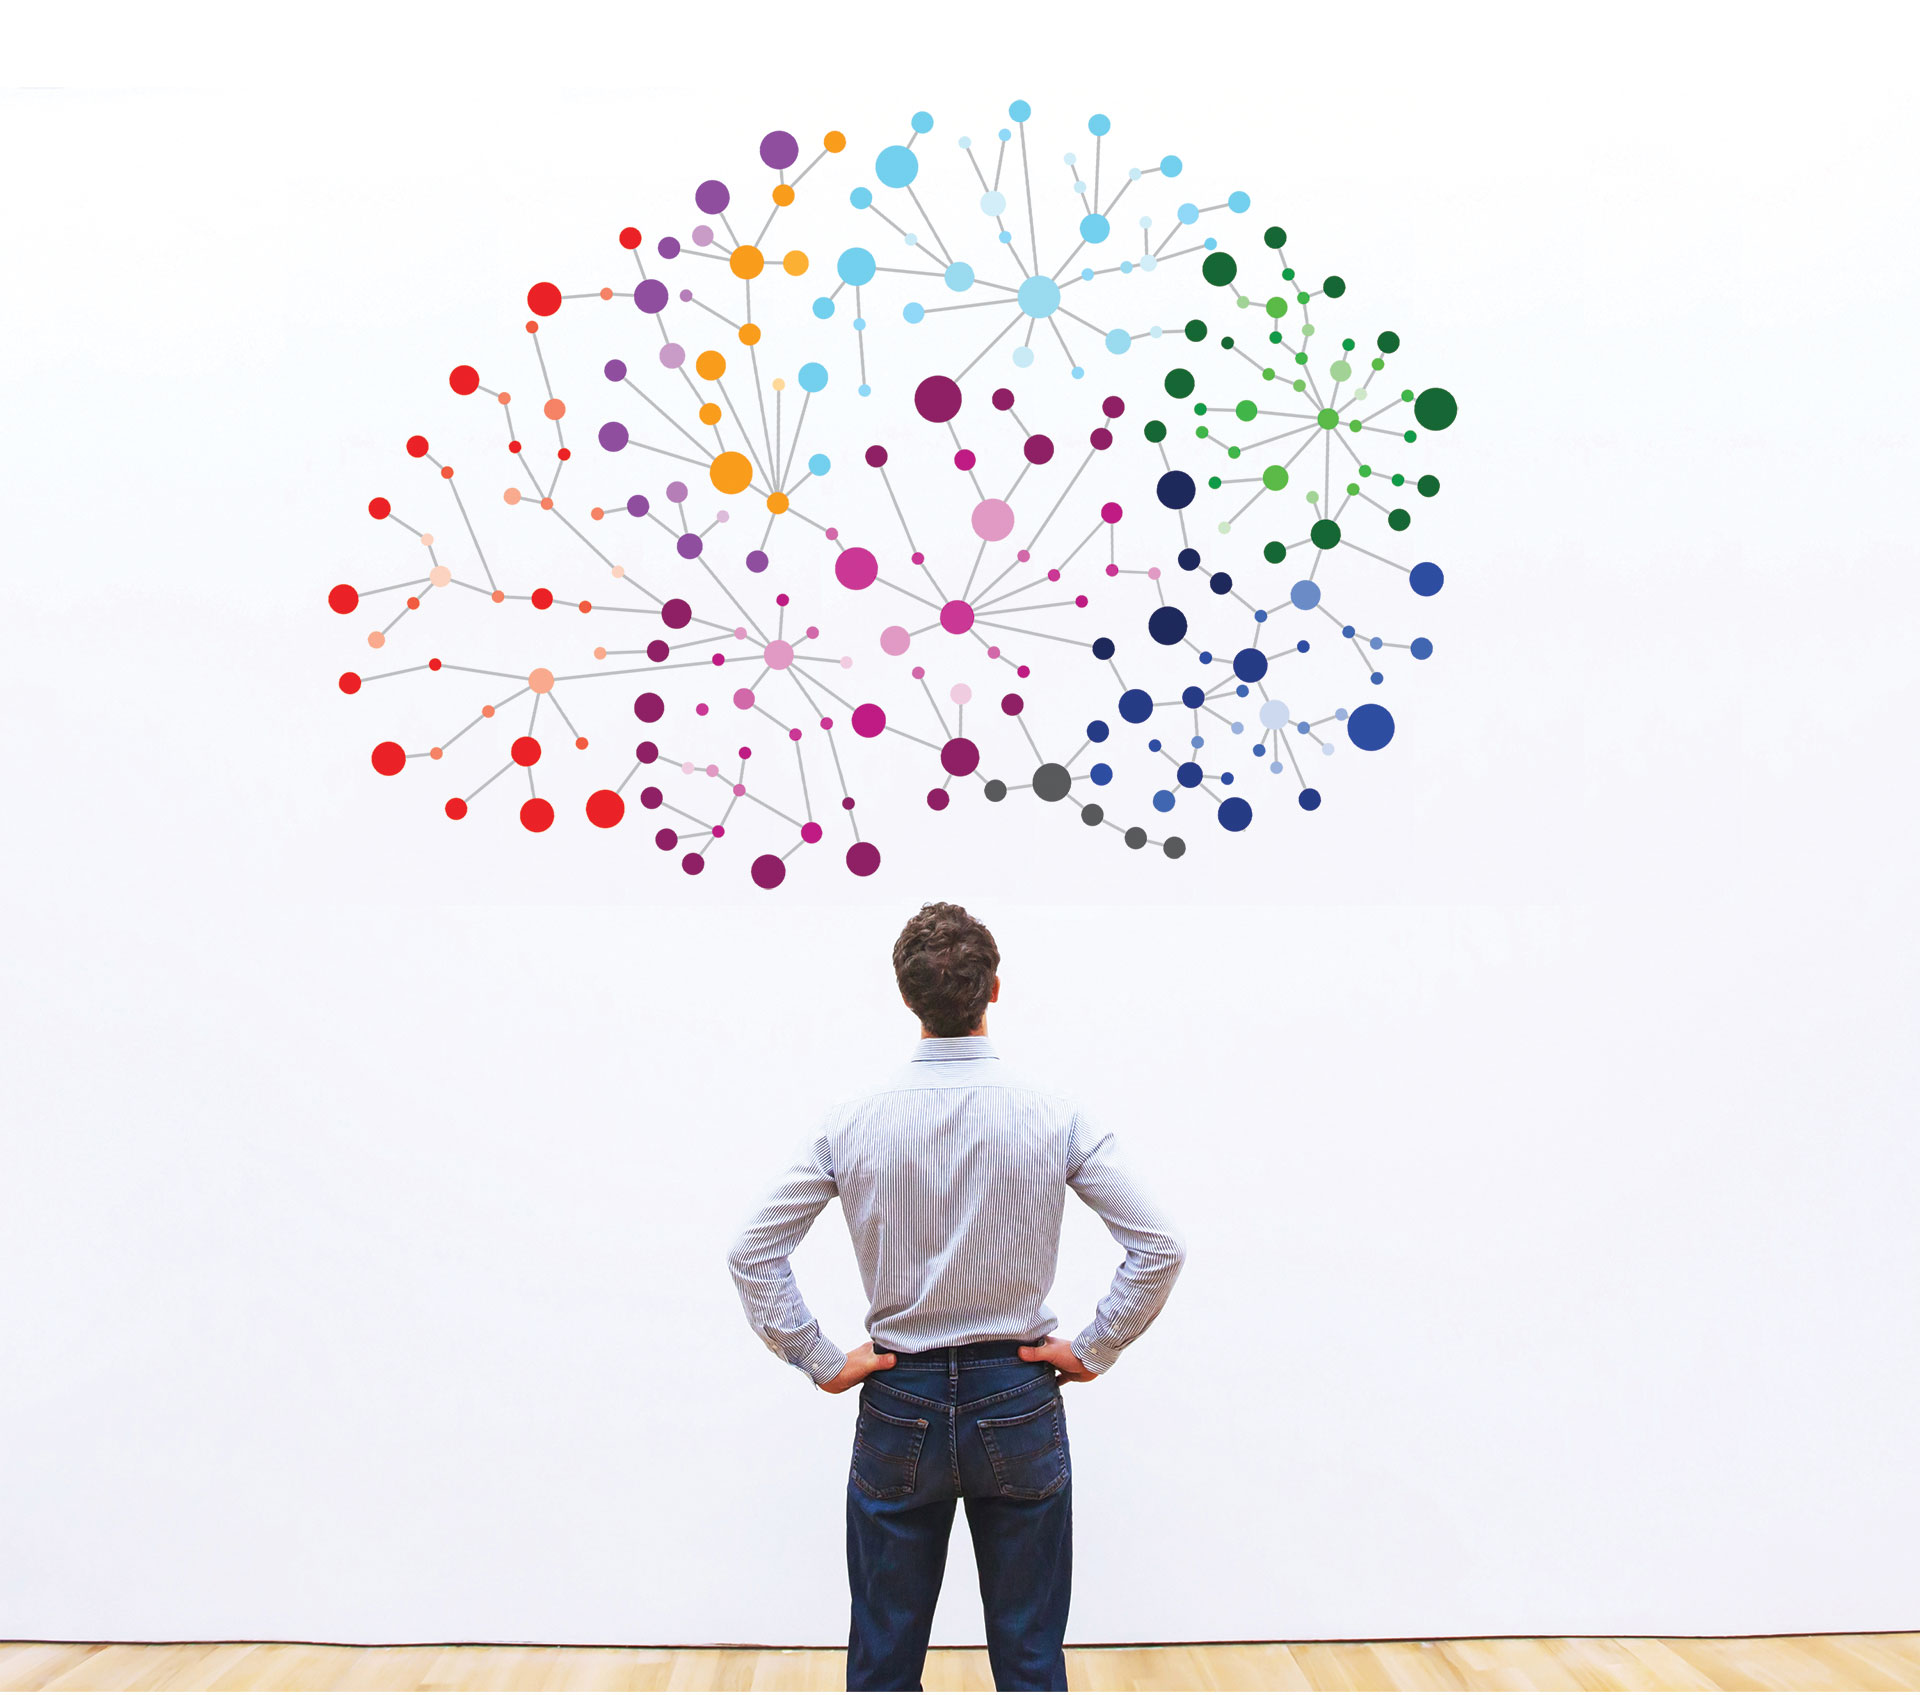 Connecting The Dots In Agency Technology